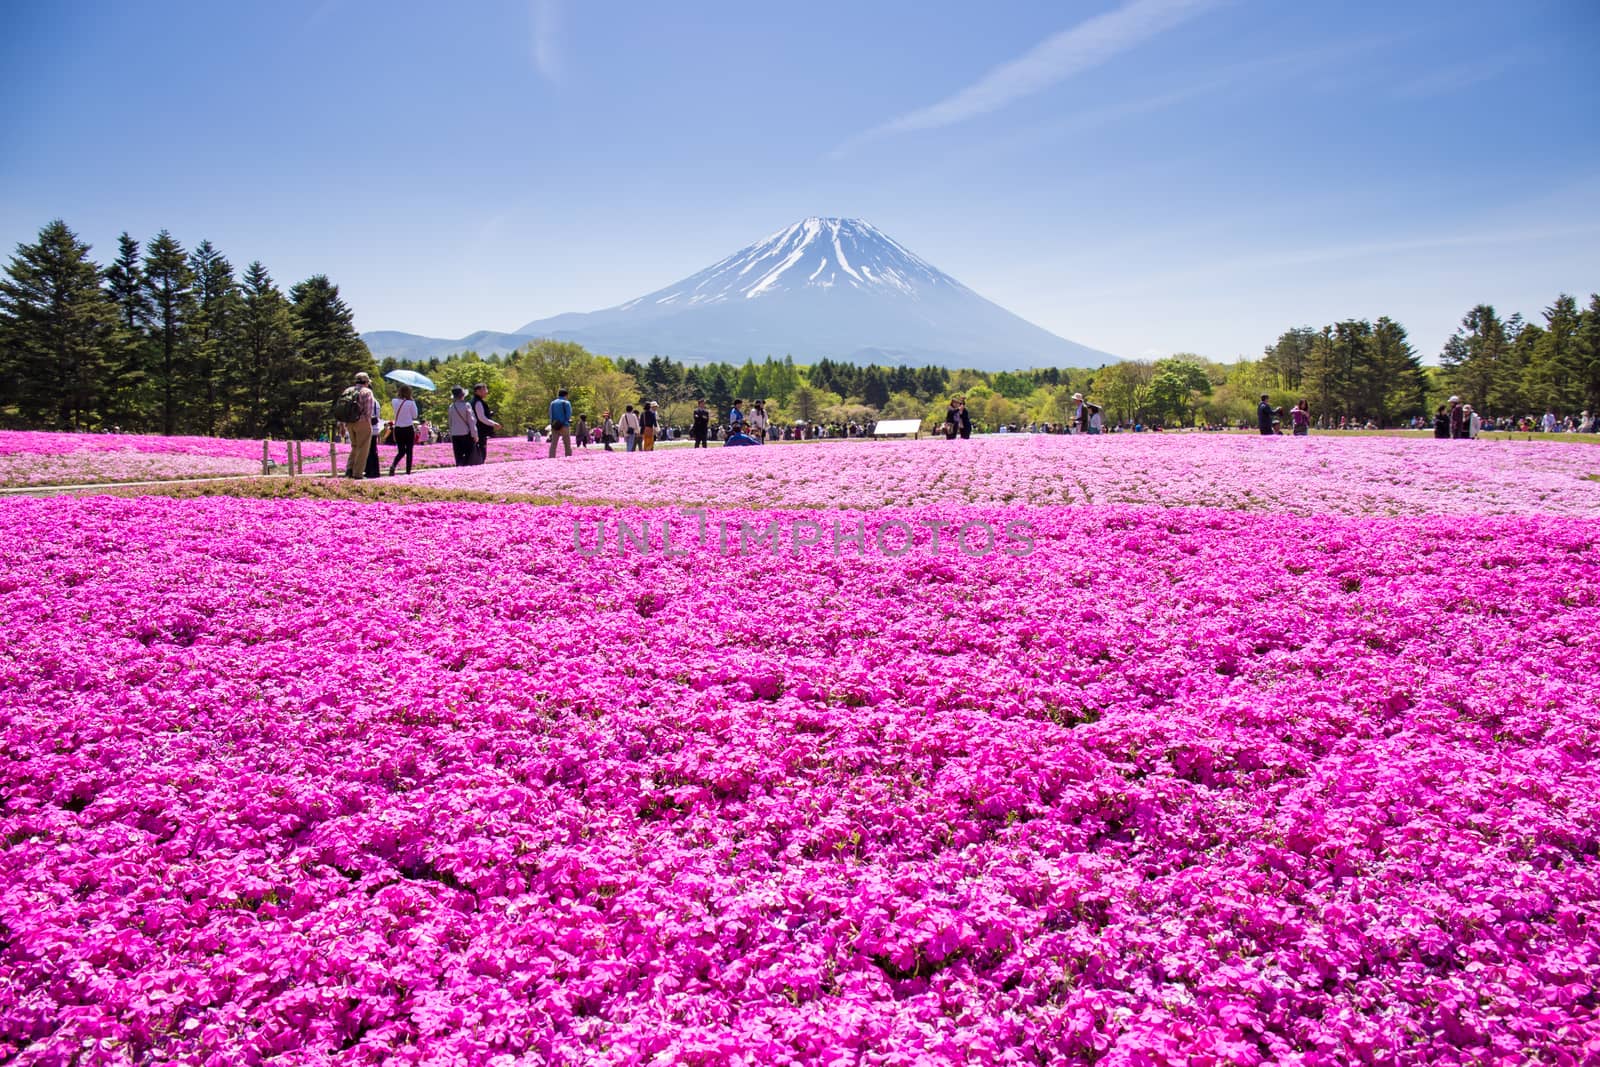 NASHIYAMA, JAPAN- 11 MAY. 2015: People from Tokyo and other cities or internatoinal come to Mt. Fuji and enjoy the cherry blossom at spring every year. Mt. Fuji is the highest mountain in Japan.